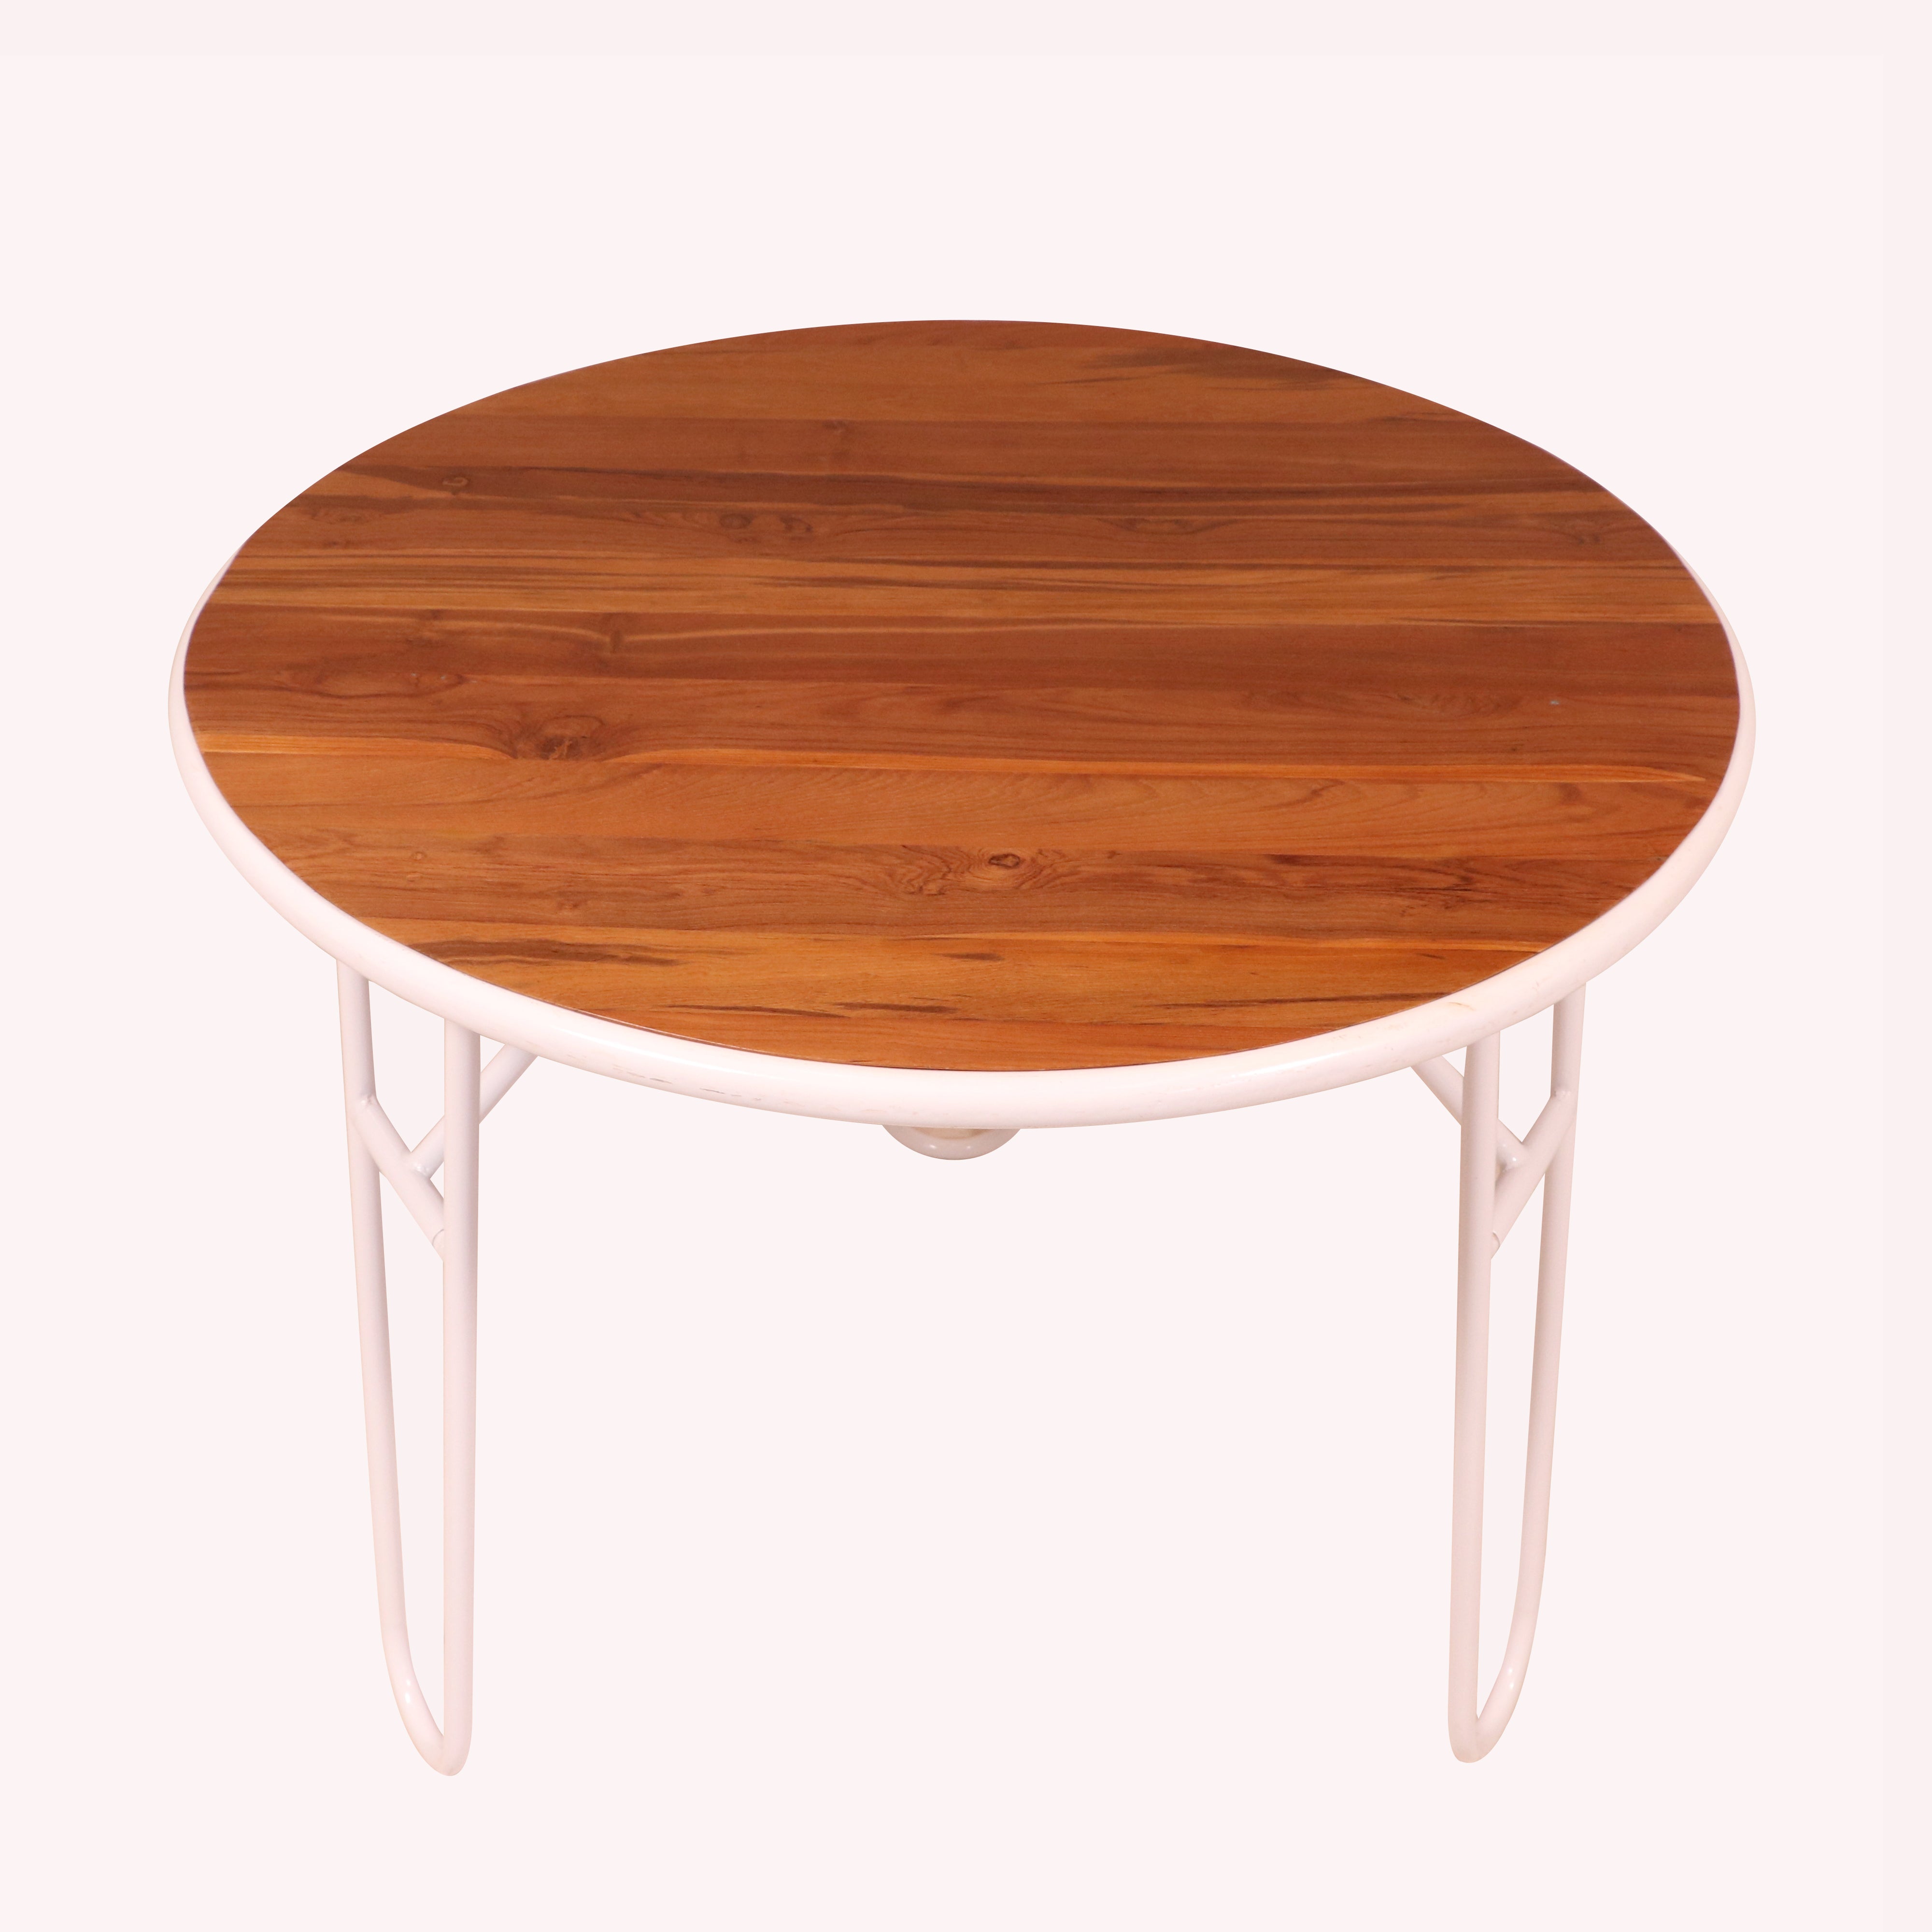 Metallic Modern Style Handmade Round Wooden Dining Table for Home Dining Table